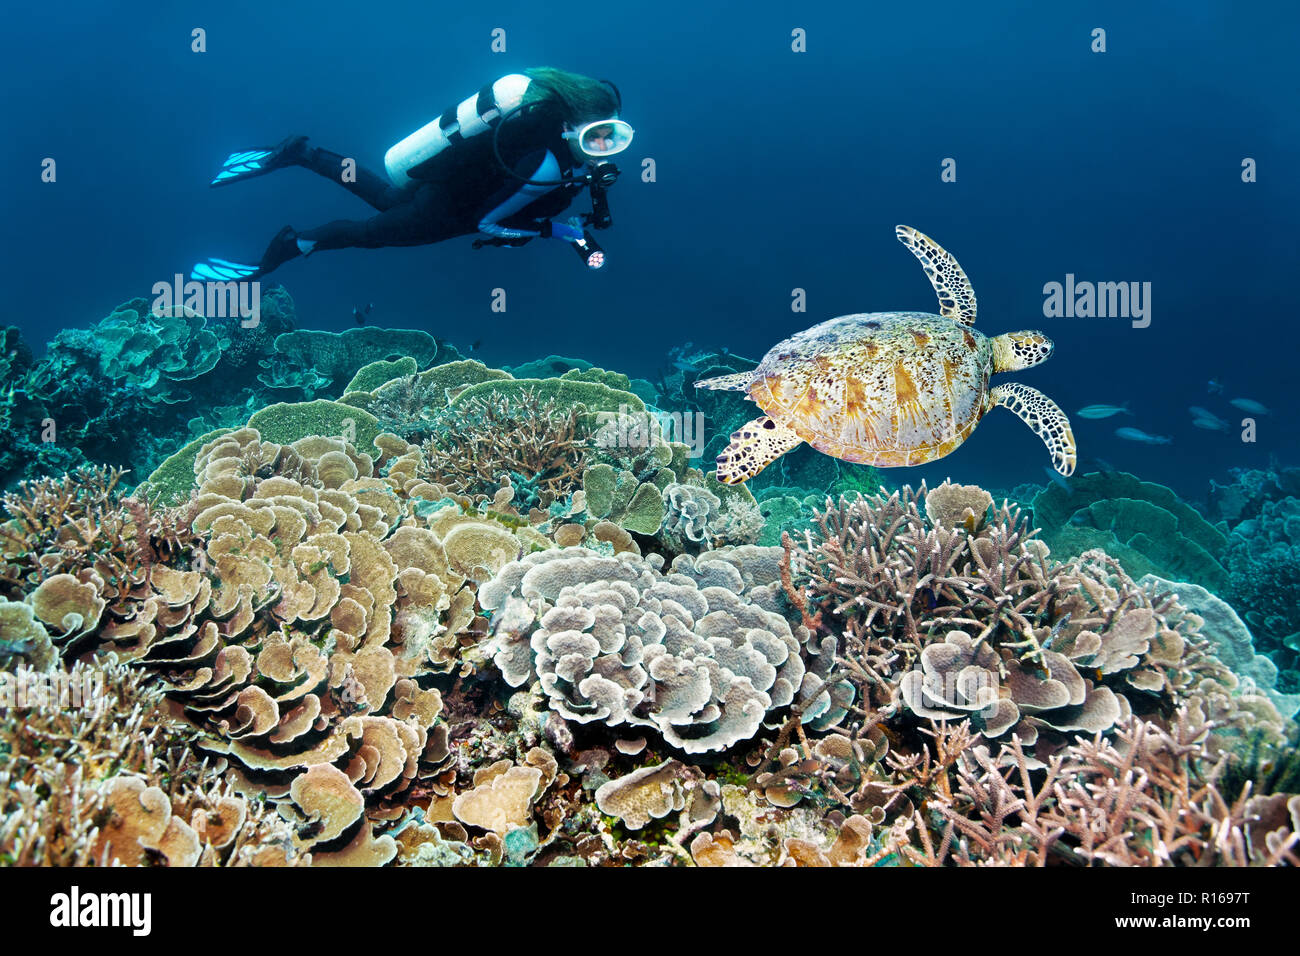 Diver dives at coral reef with different stone corals (Hexacorallia) observes Green turtle (Chelonia mydas), Great barrier reef Stock Photo